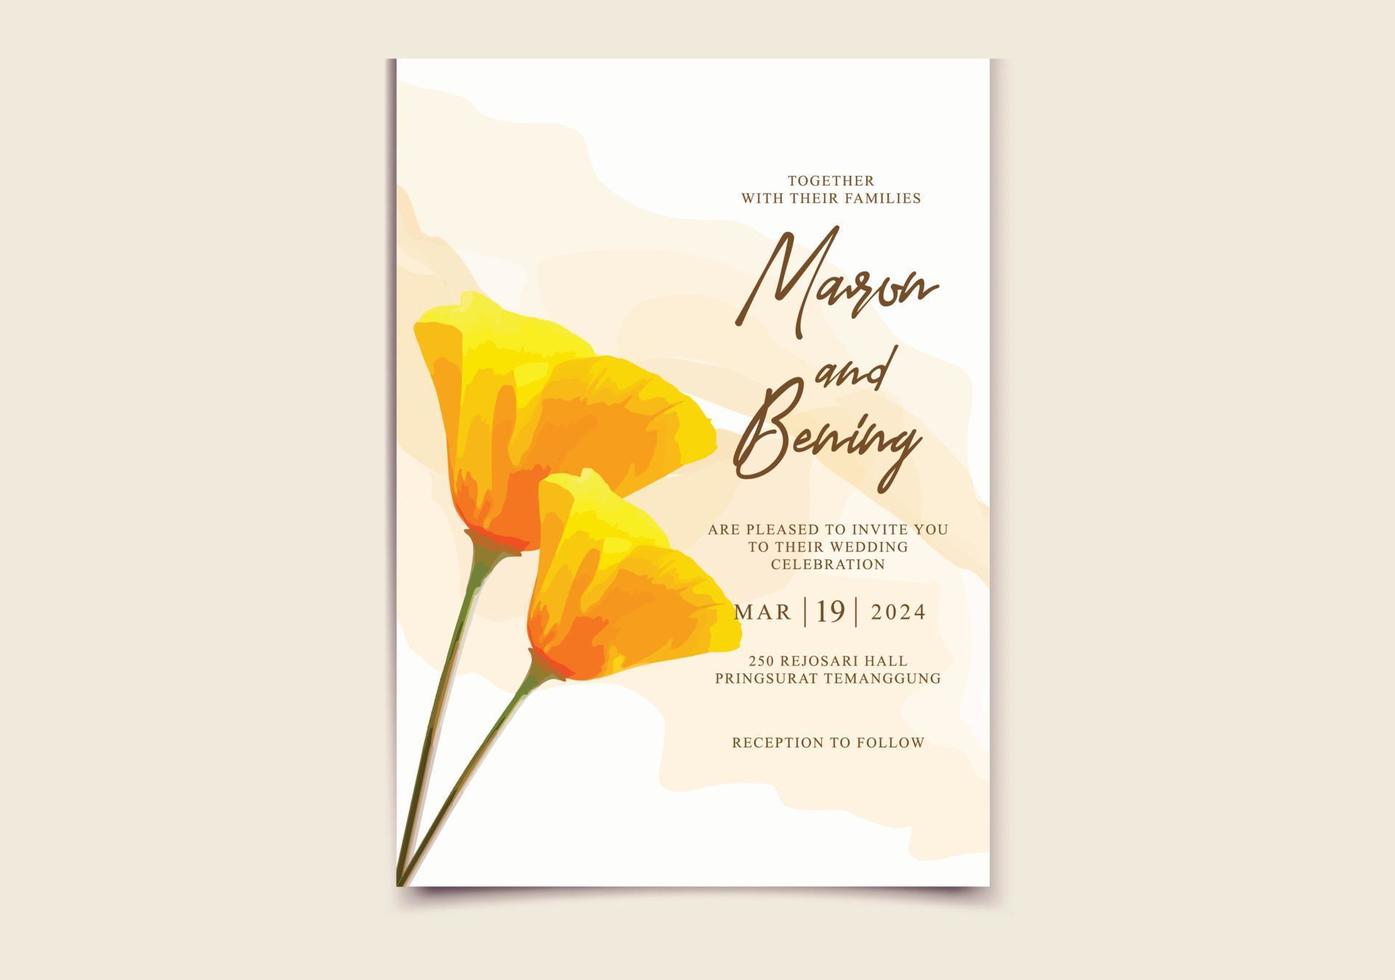 Wedding invitation card with beautiful blooming floral vector